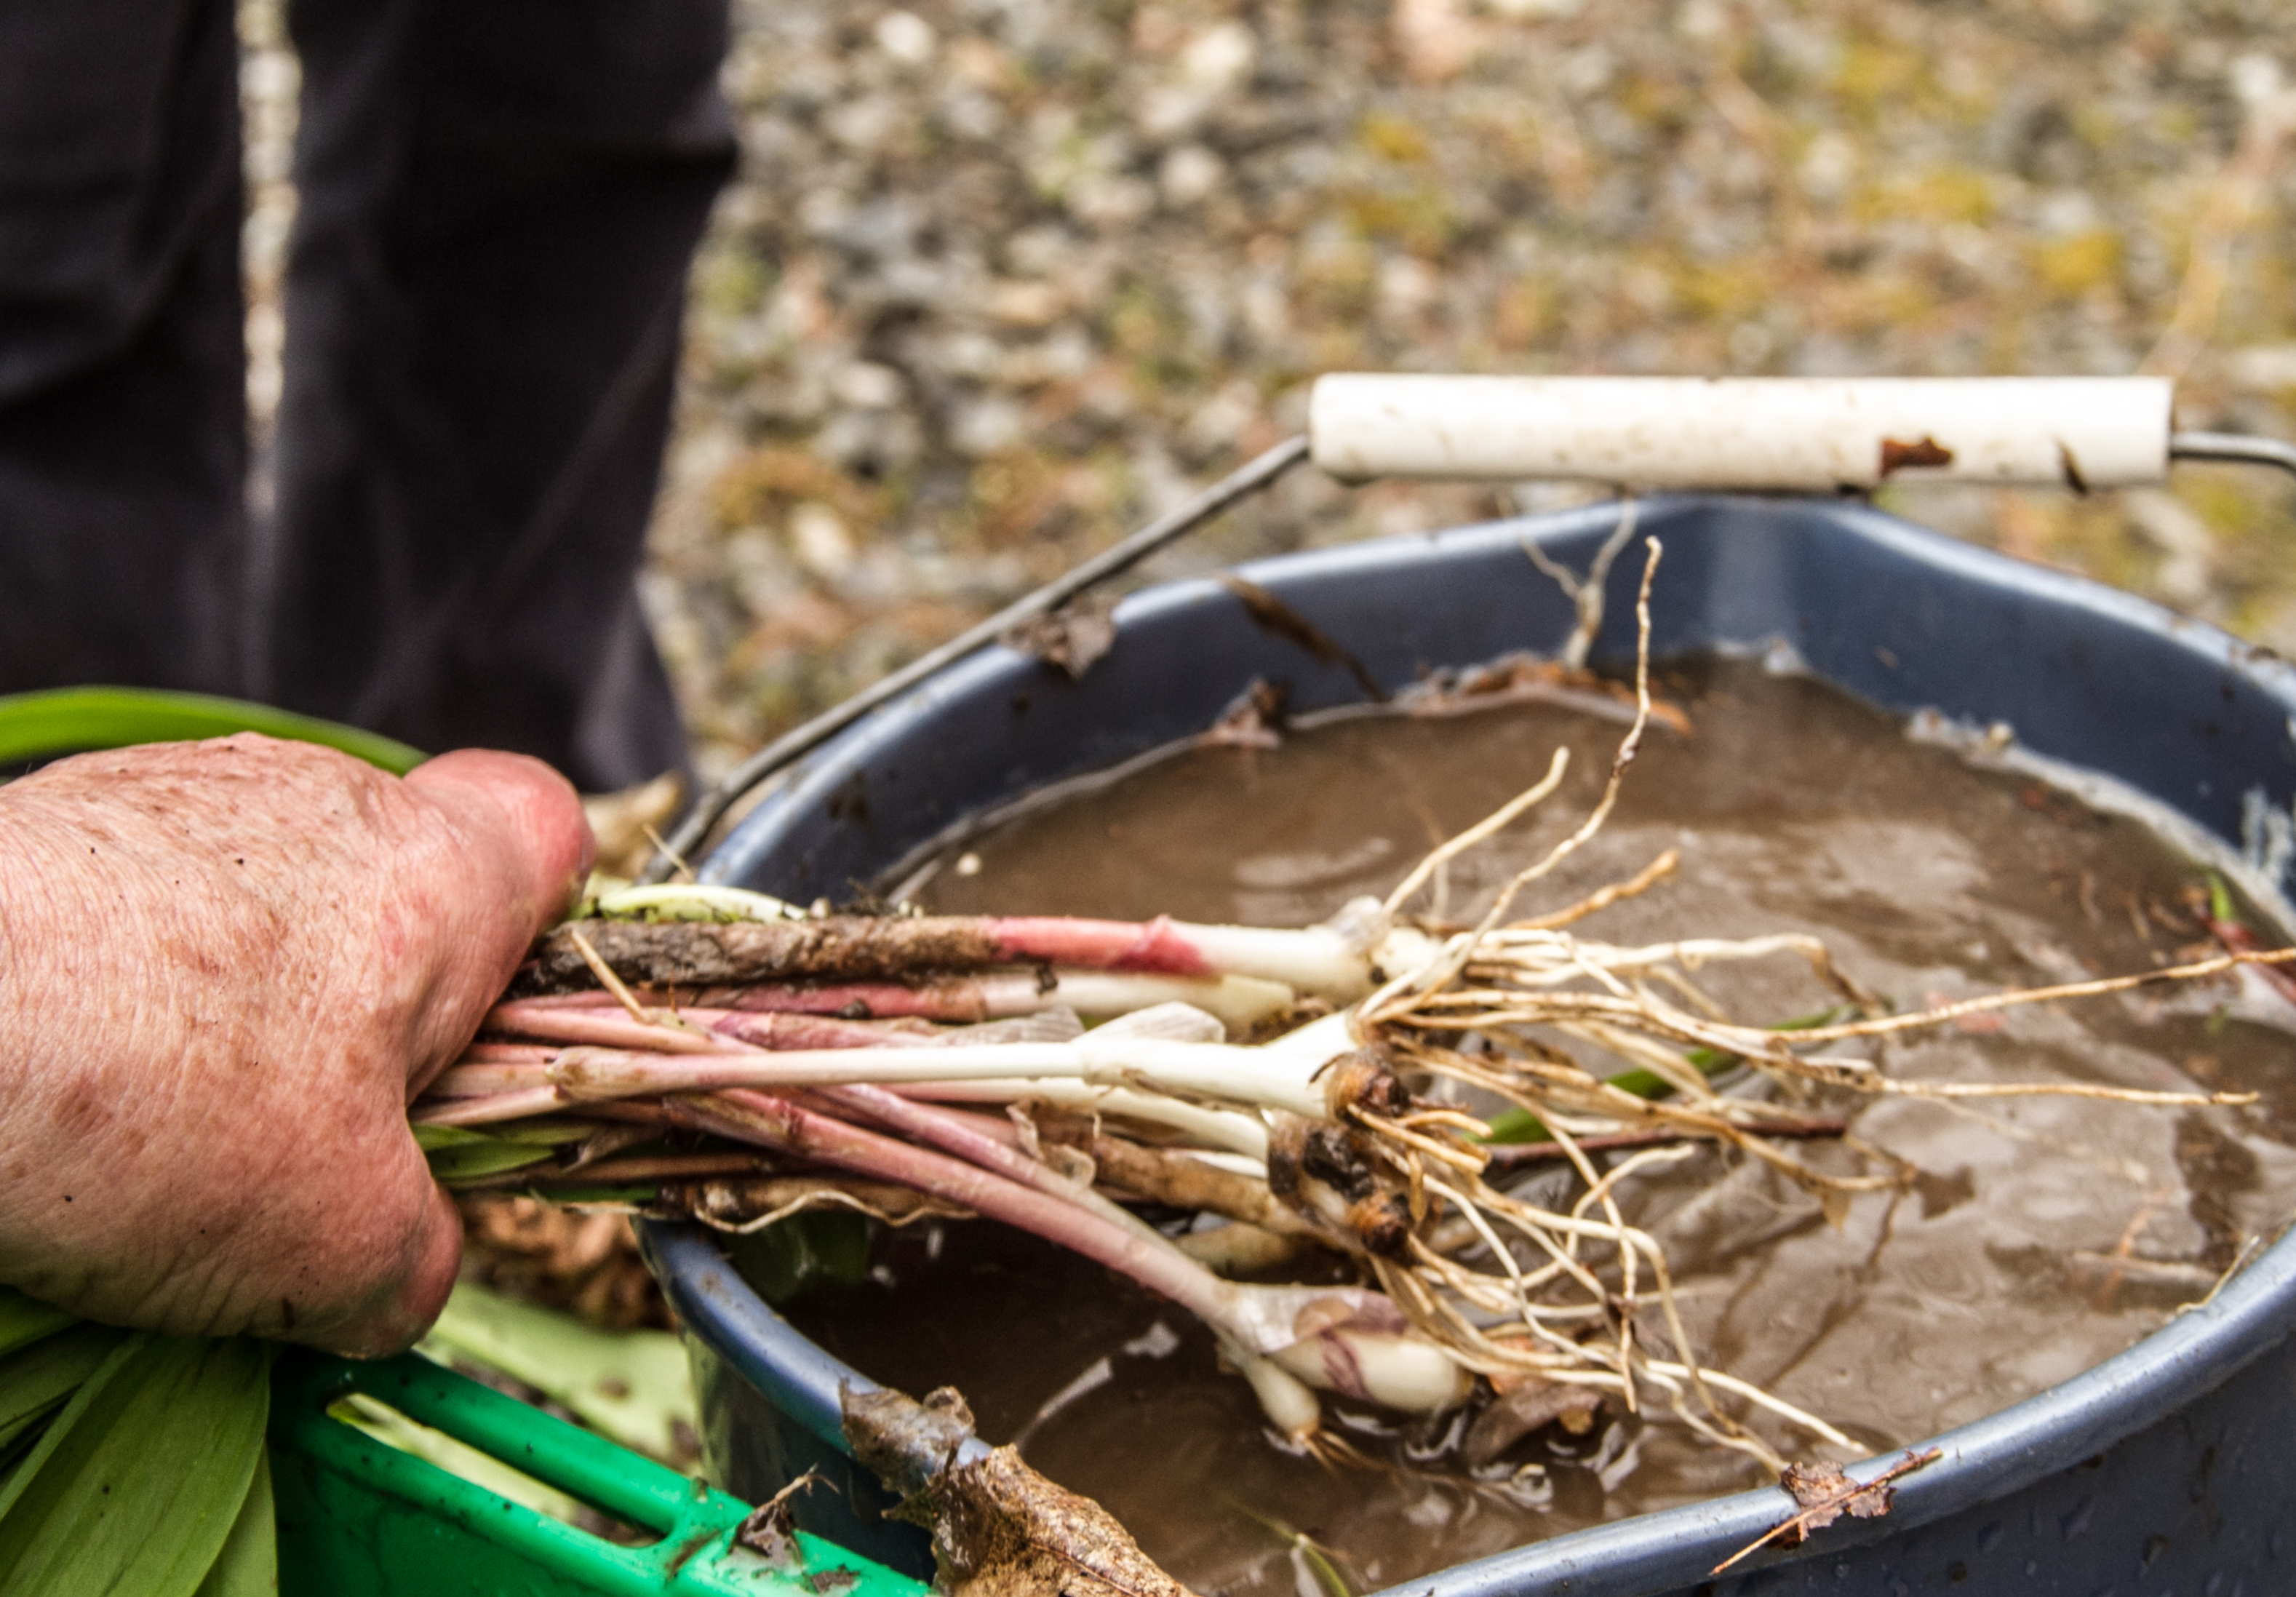 Cleaning ramps and preparing them for cooking is quick and easy. Wash off the dirt, carefully trim the roots and they are ready to go. 